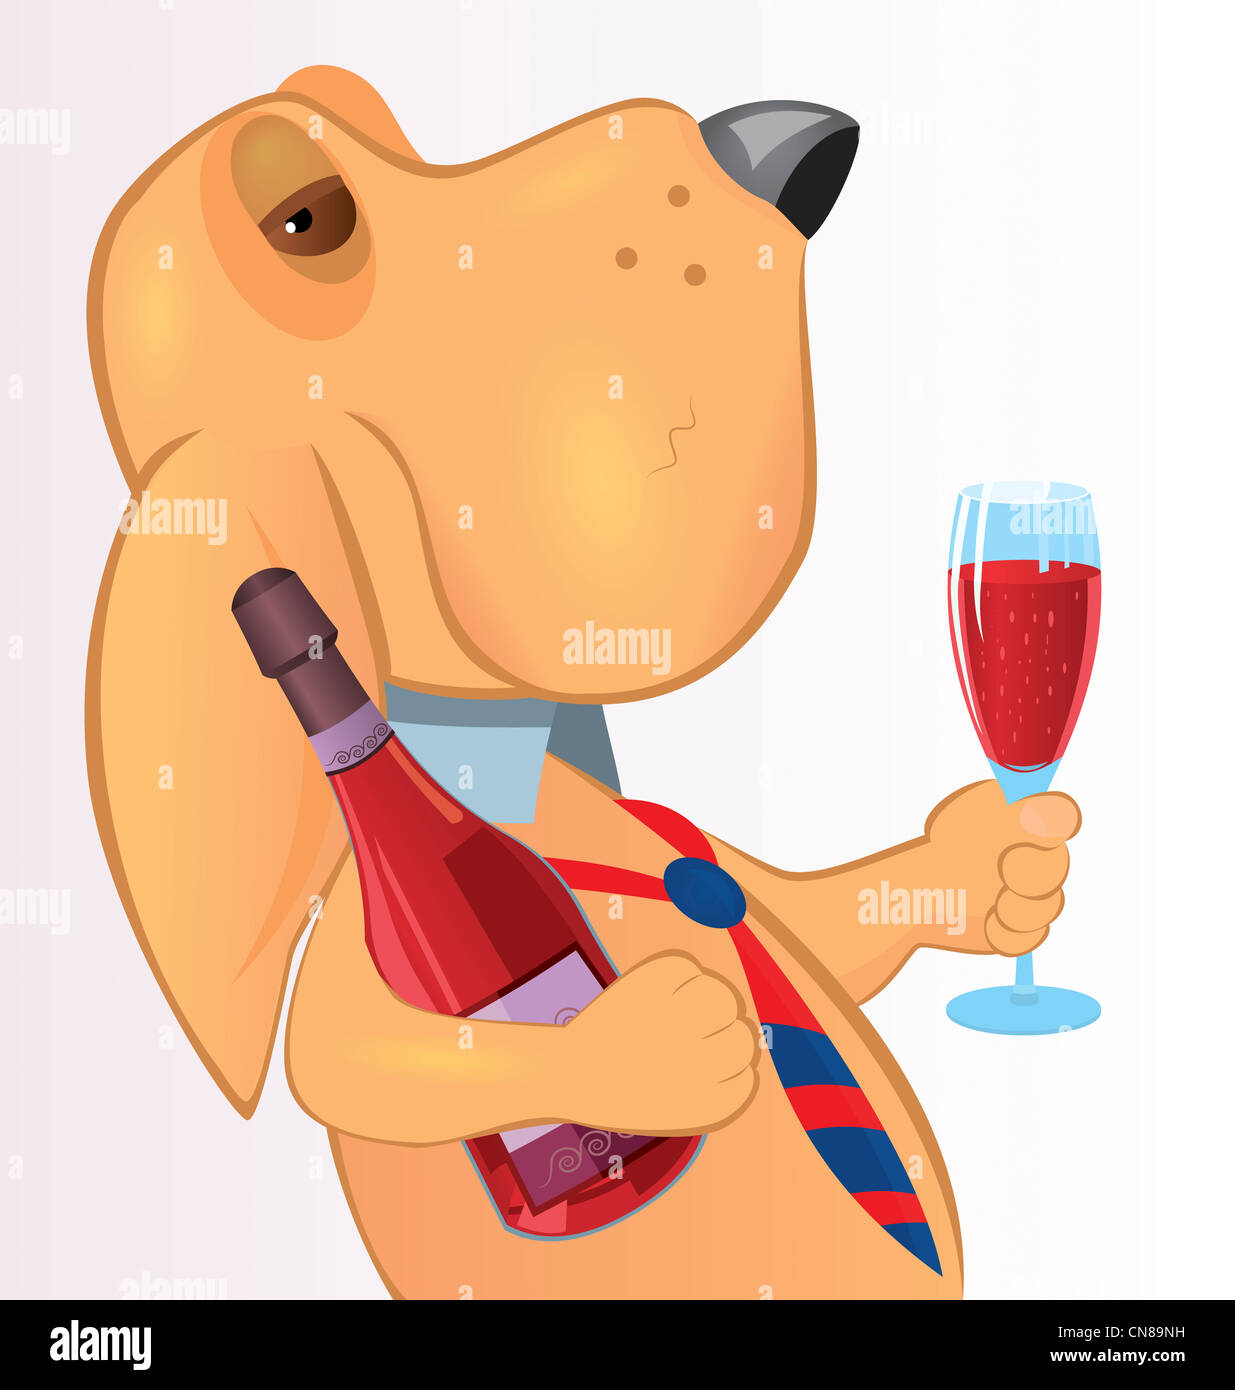 Cartoon character dog holding bottle and glass of wine vector illustration  Stock Photo